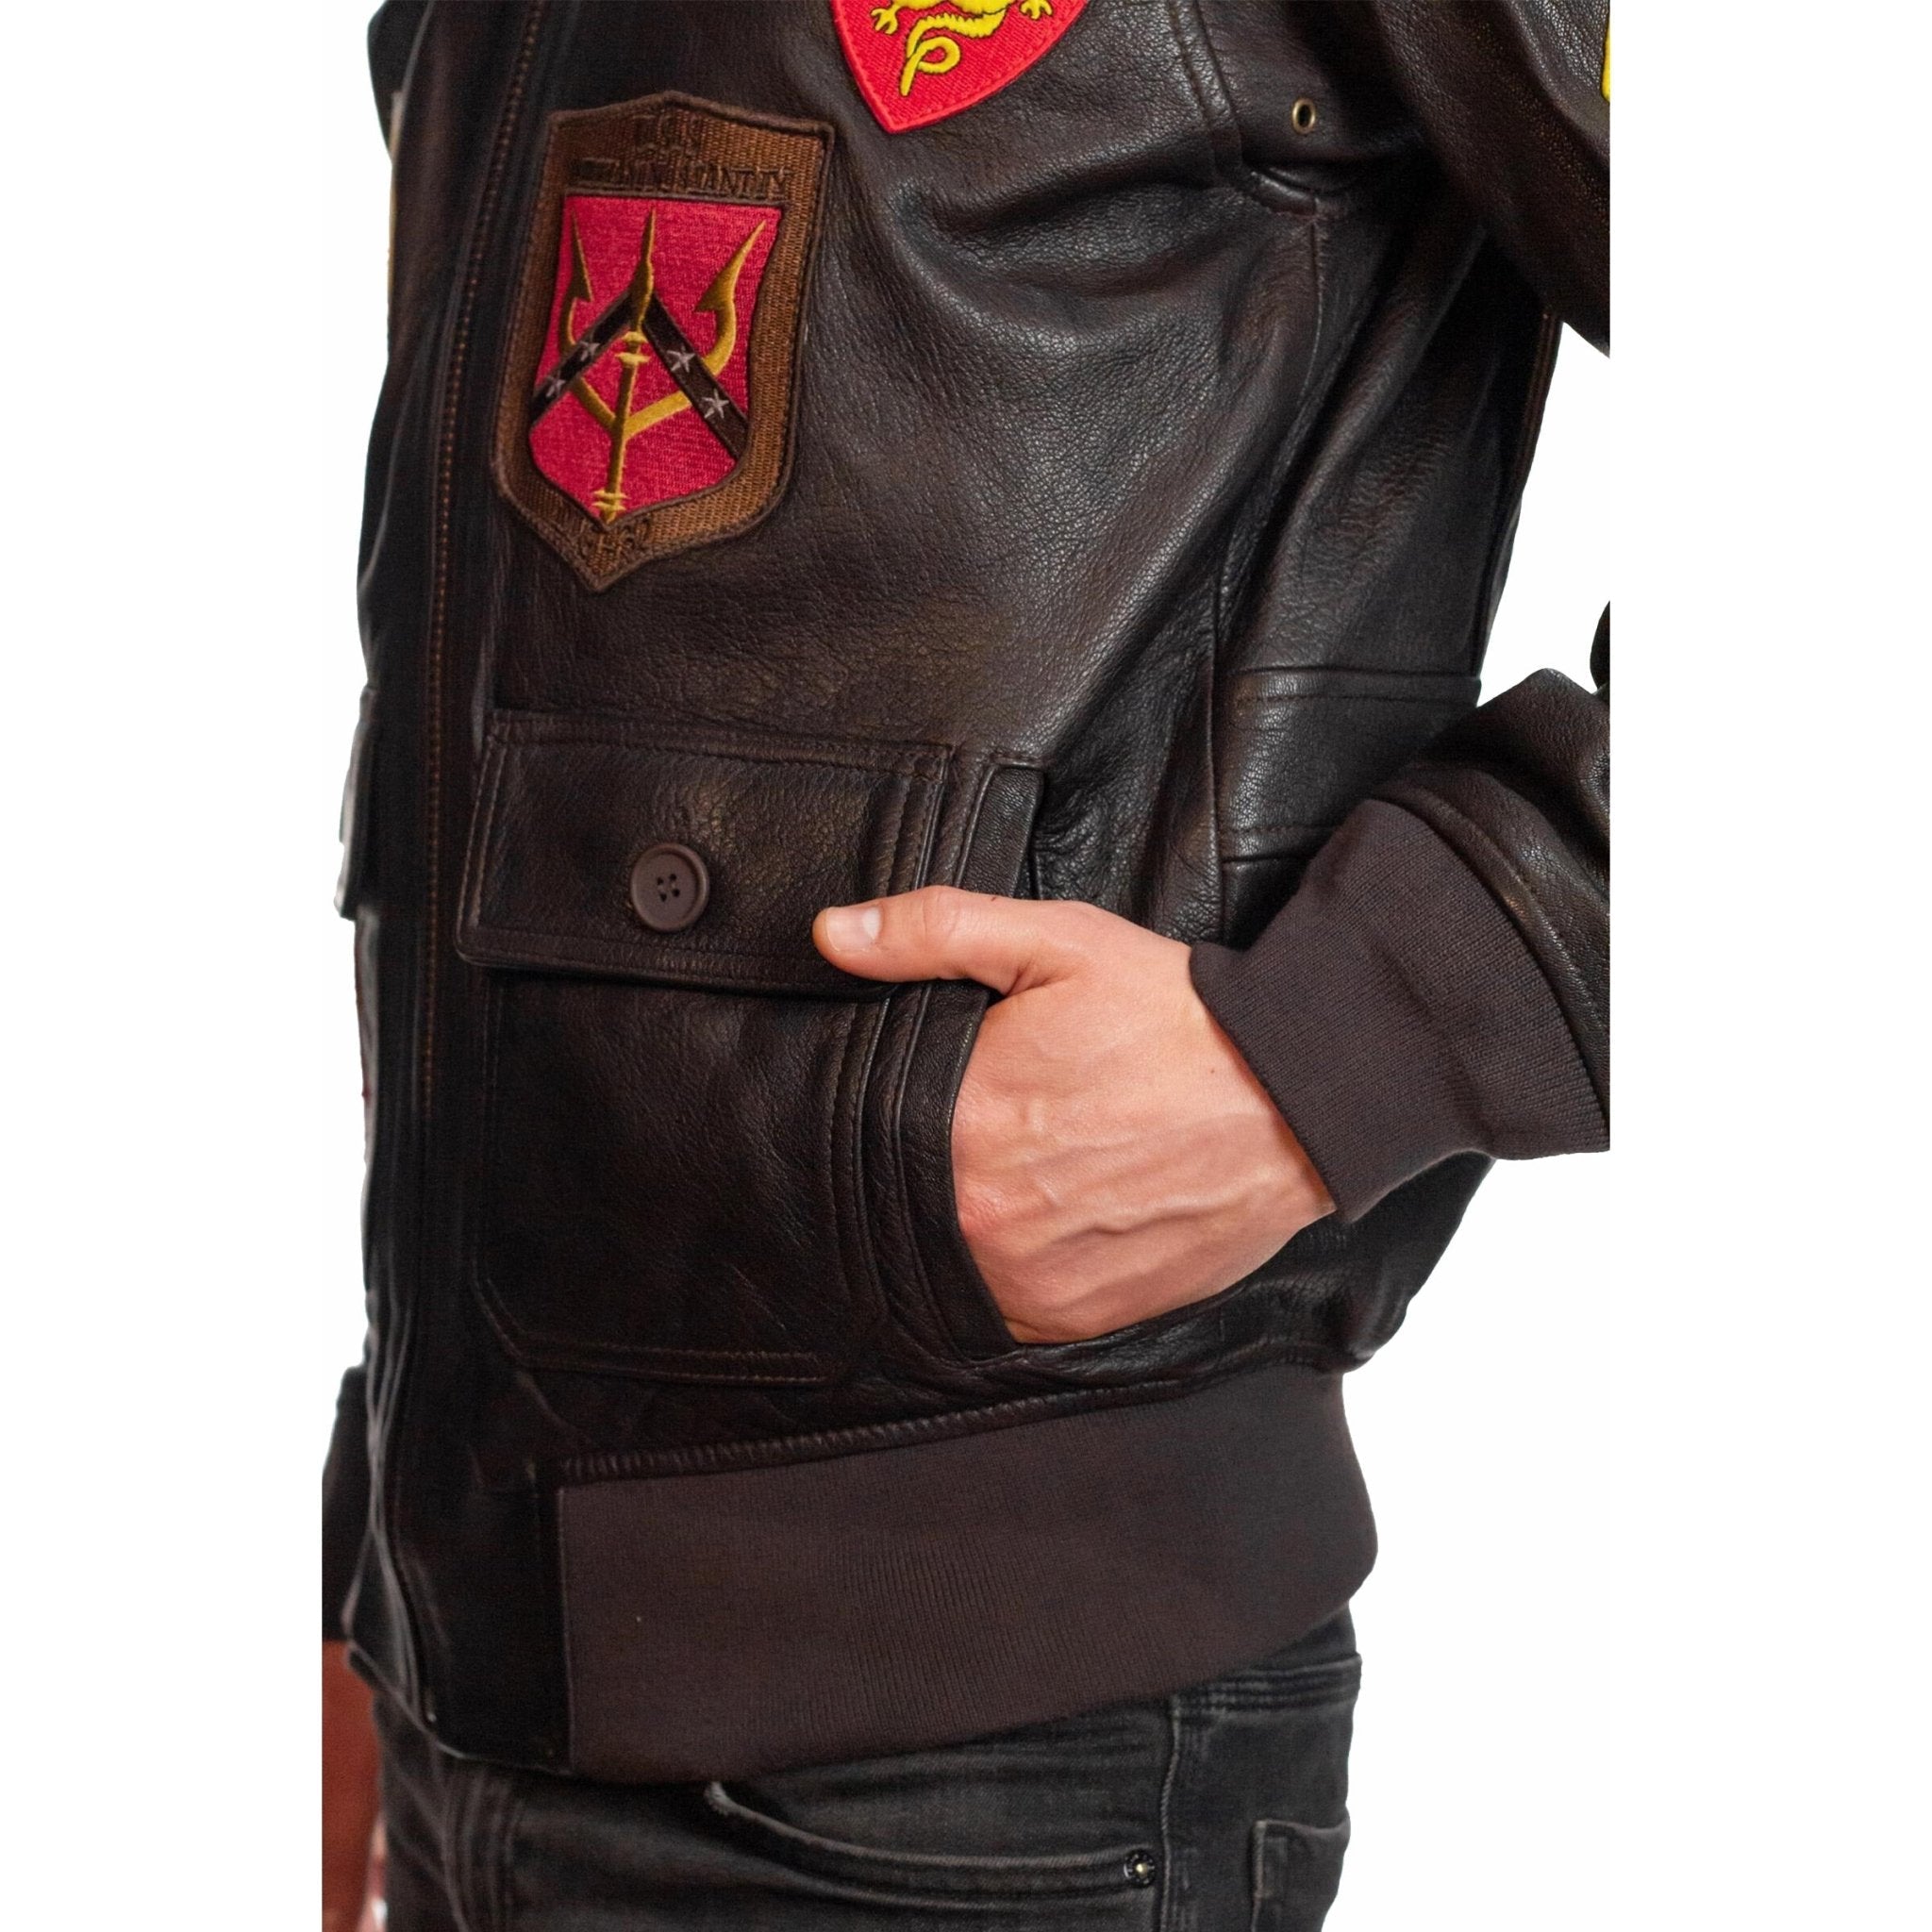 Top Gun® Official G-1 Leather Jacket with Patches - PilotMall.com